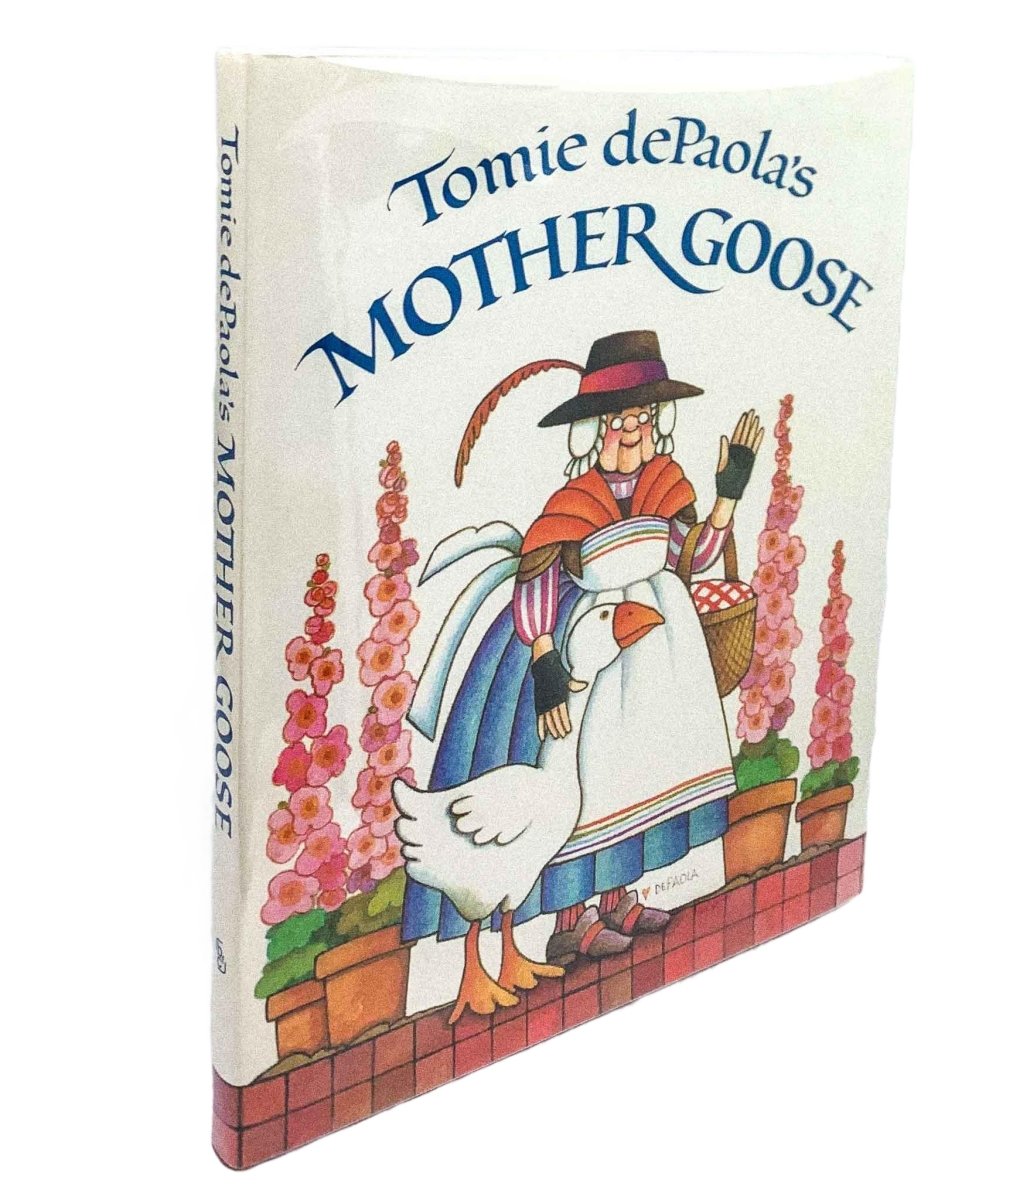  Tomie Depaola Collectable Book | Tomie Depaola'S Mother Goose | Cheltenham Rare Books